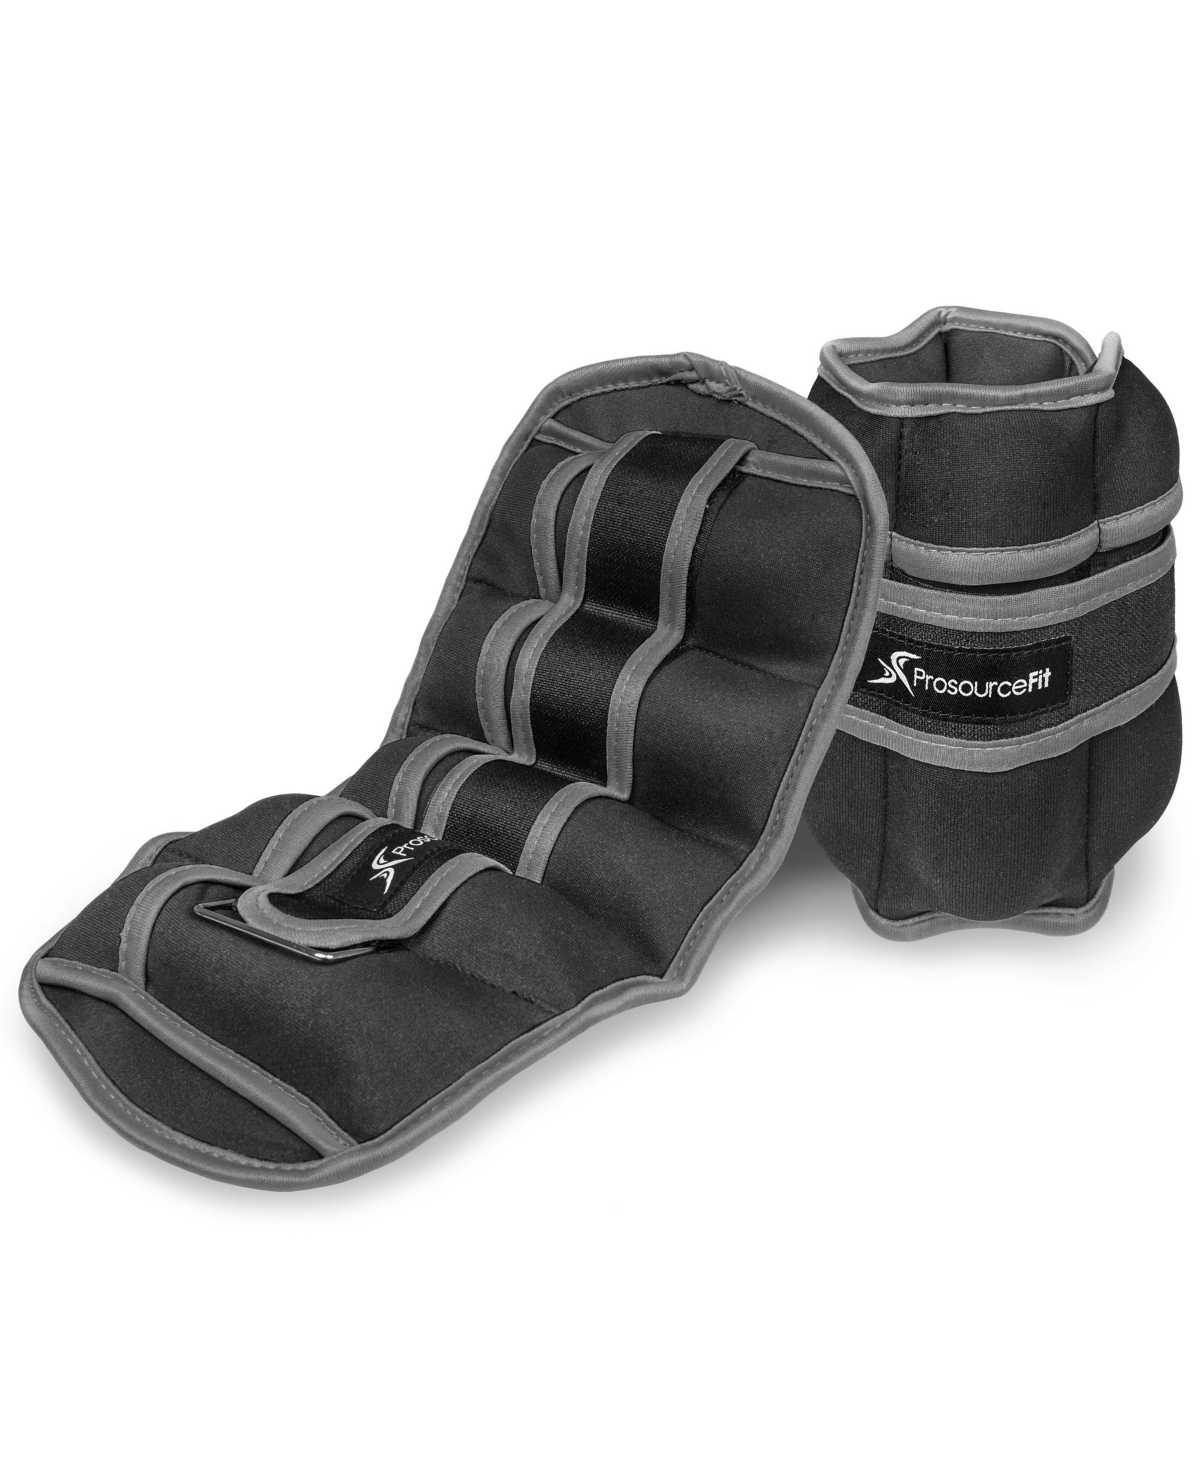 Adjustable Ankle Weights, Set of 2, 5lbs - Grey